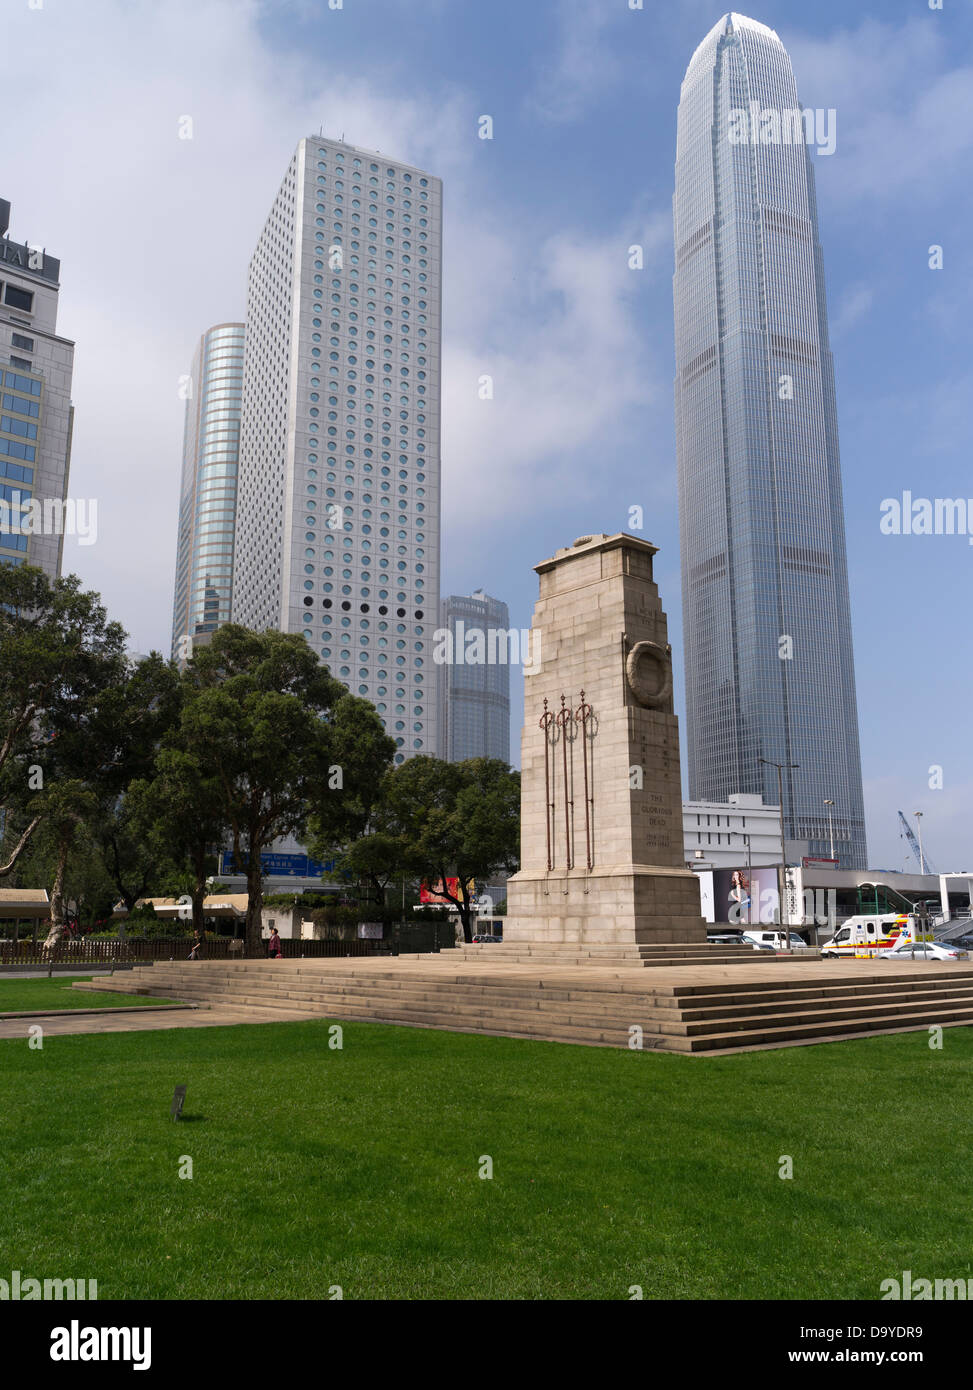 dh Cenotaph CENTRALE HONG KONG Central District City skyline jardin house ifc british Empire Colony Wartime Foto Stock